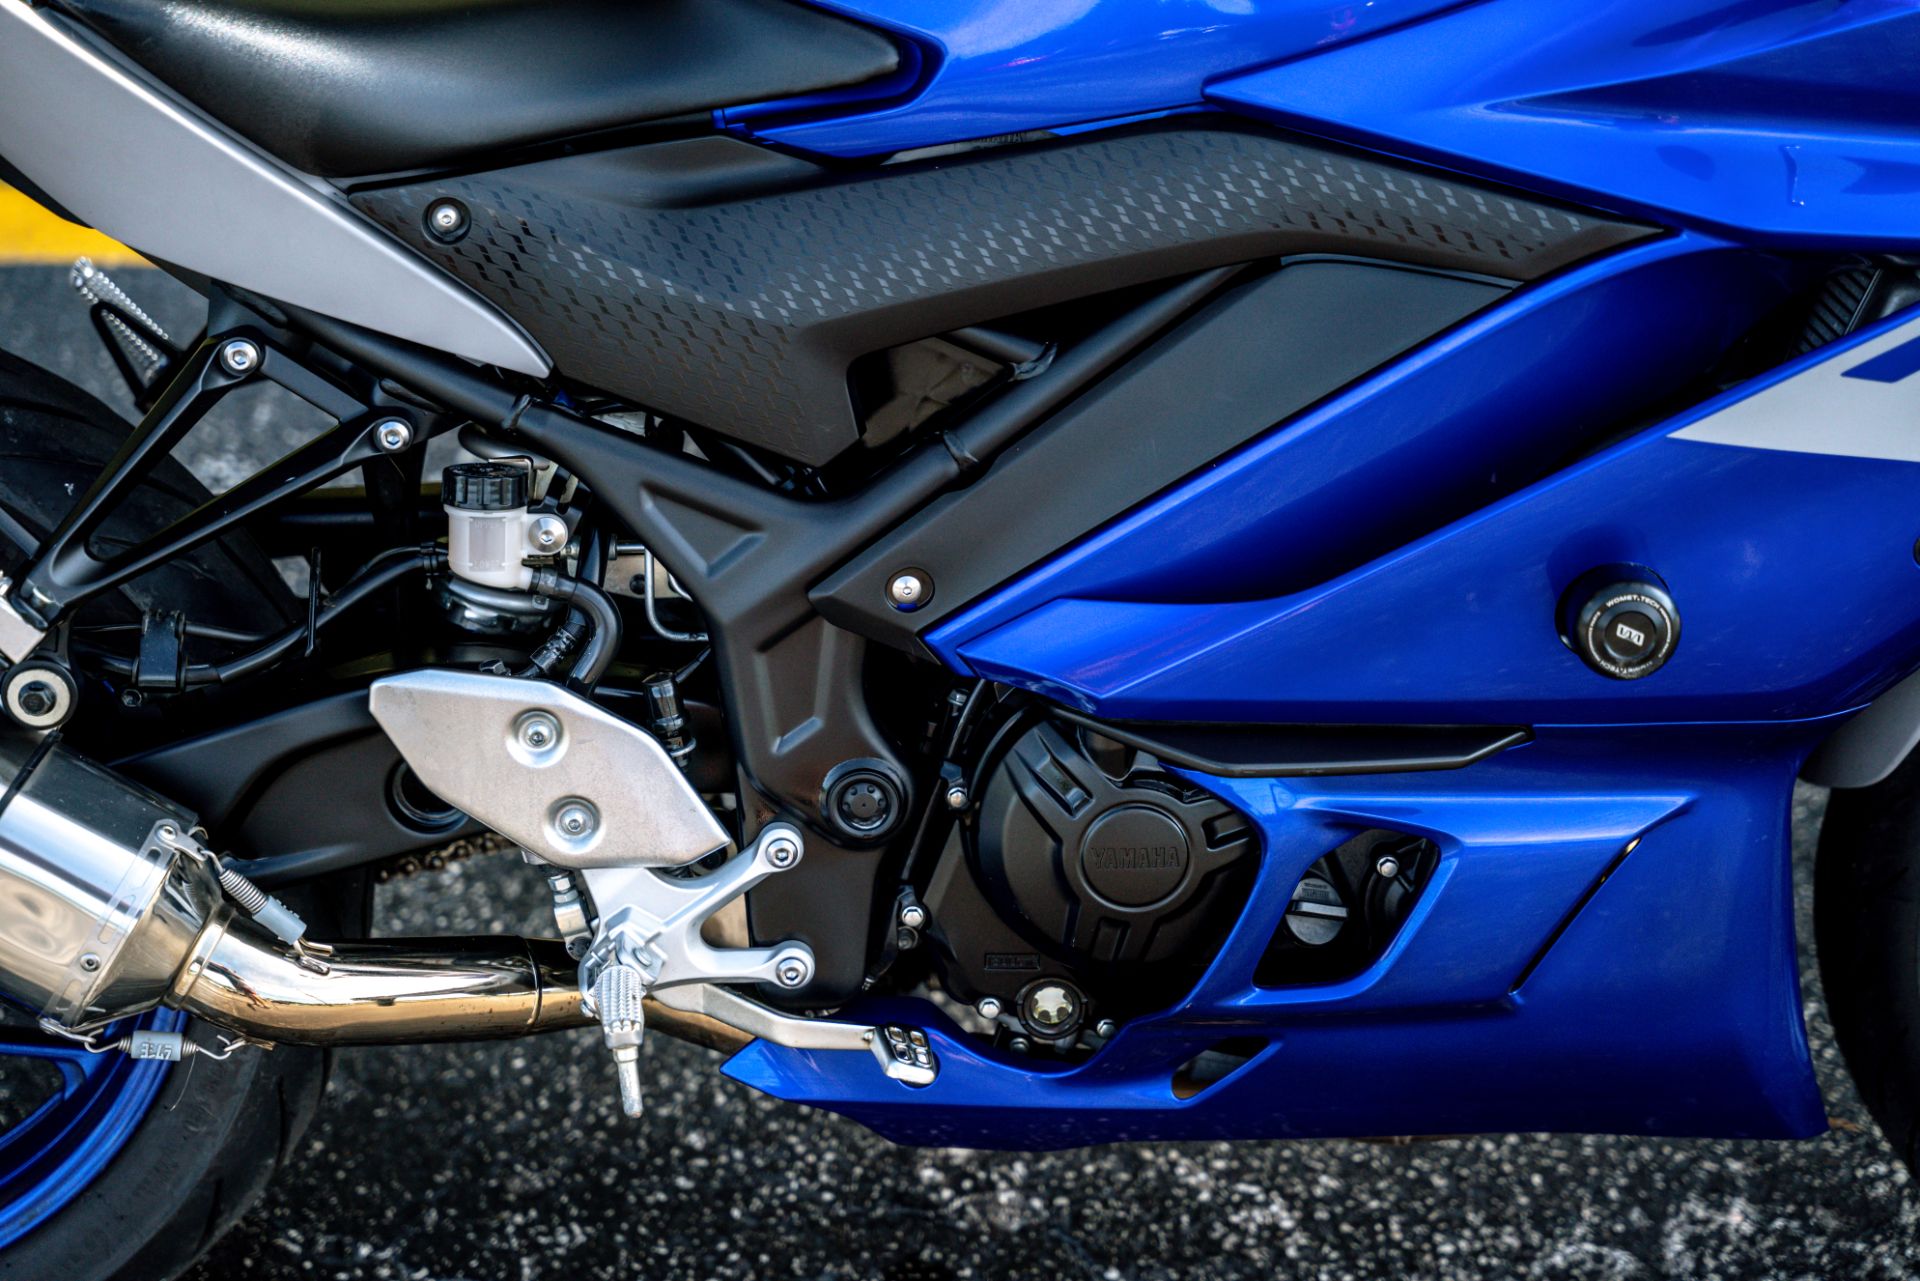 2021 Yamaha YZF-R3 ABS in Jacksonville, Florida - Photo 8